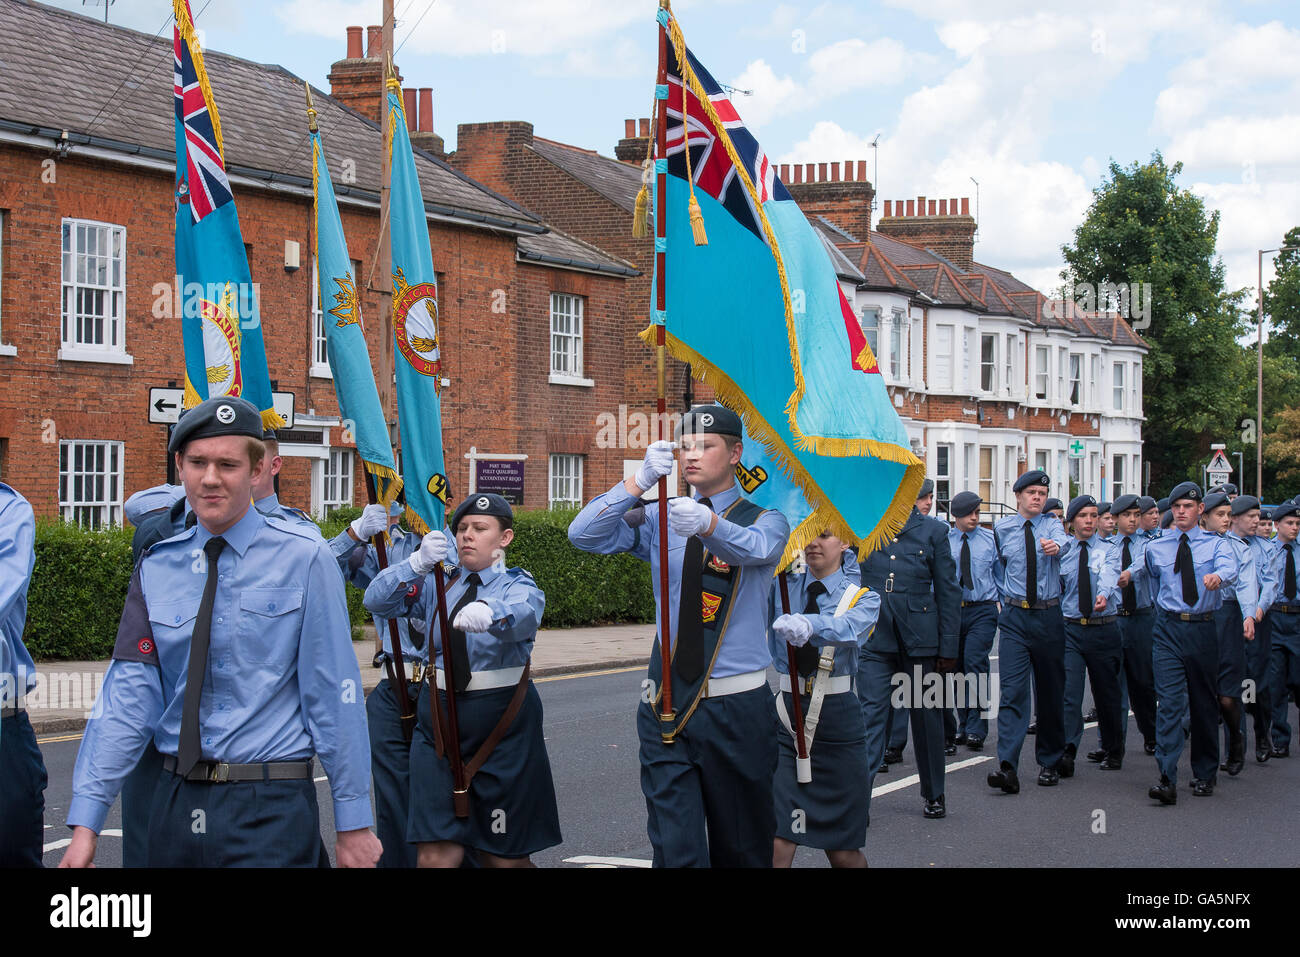 Brentwood Essex, 3rd July 2016, Airr Training Corps cadets of the Essex Wing march past on the 75th anniversary of the ATC Credit:  Ian Davidson/Alamy Live News Stock Photo